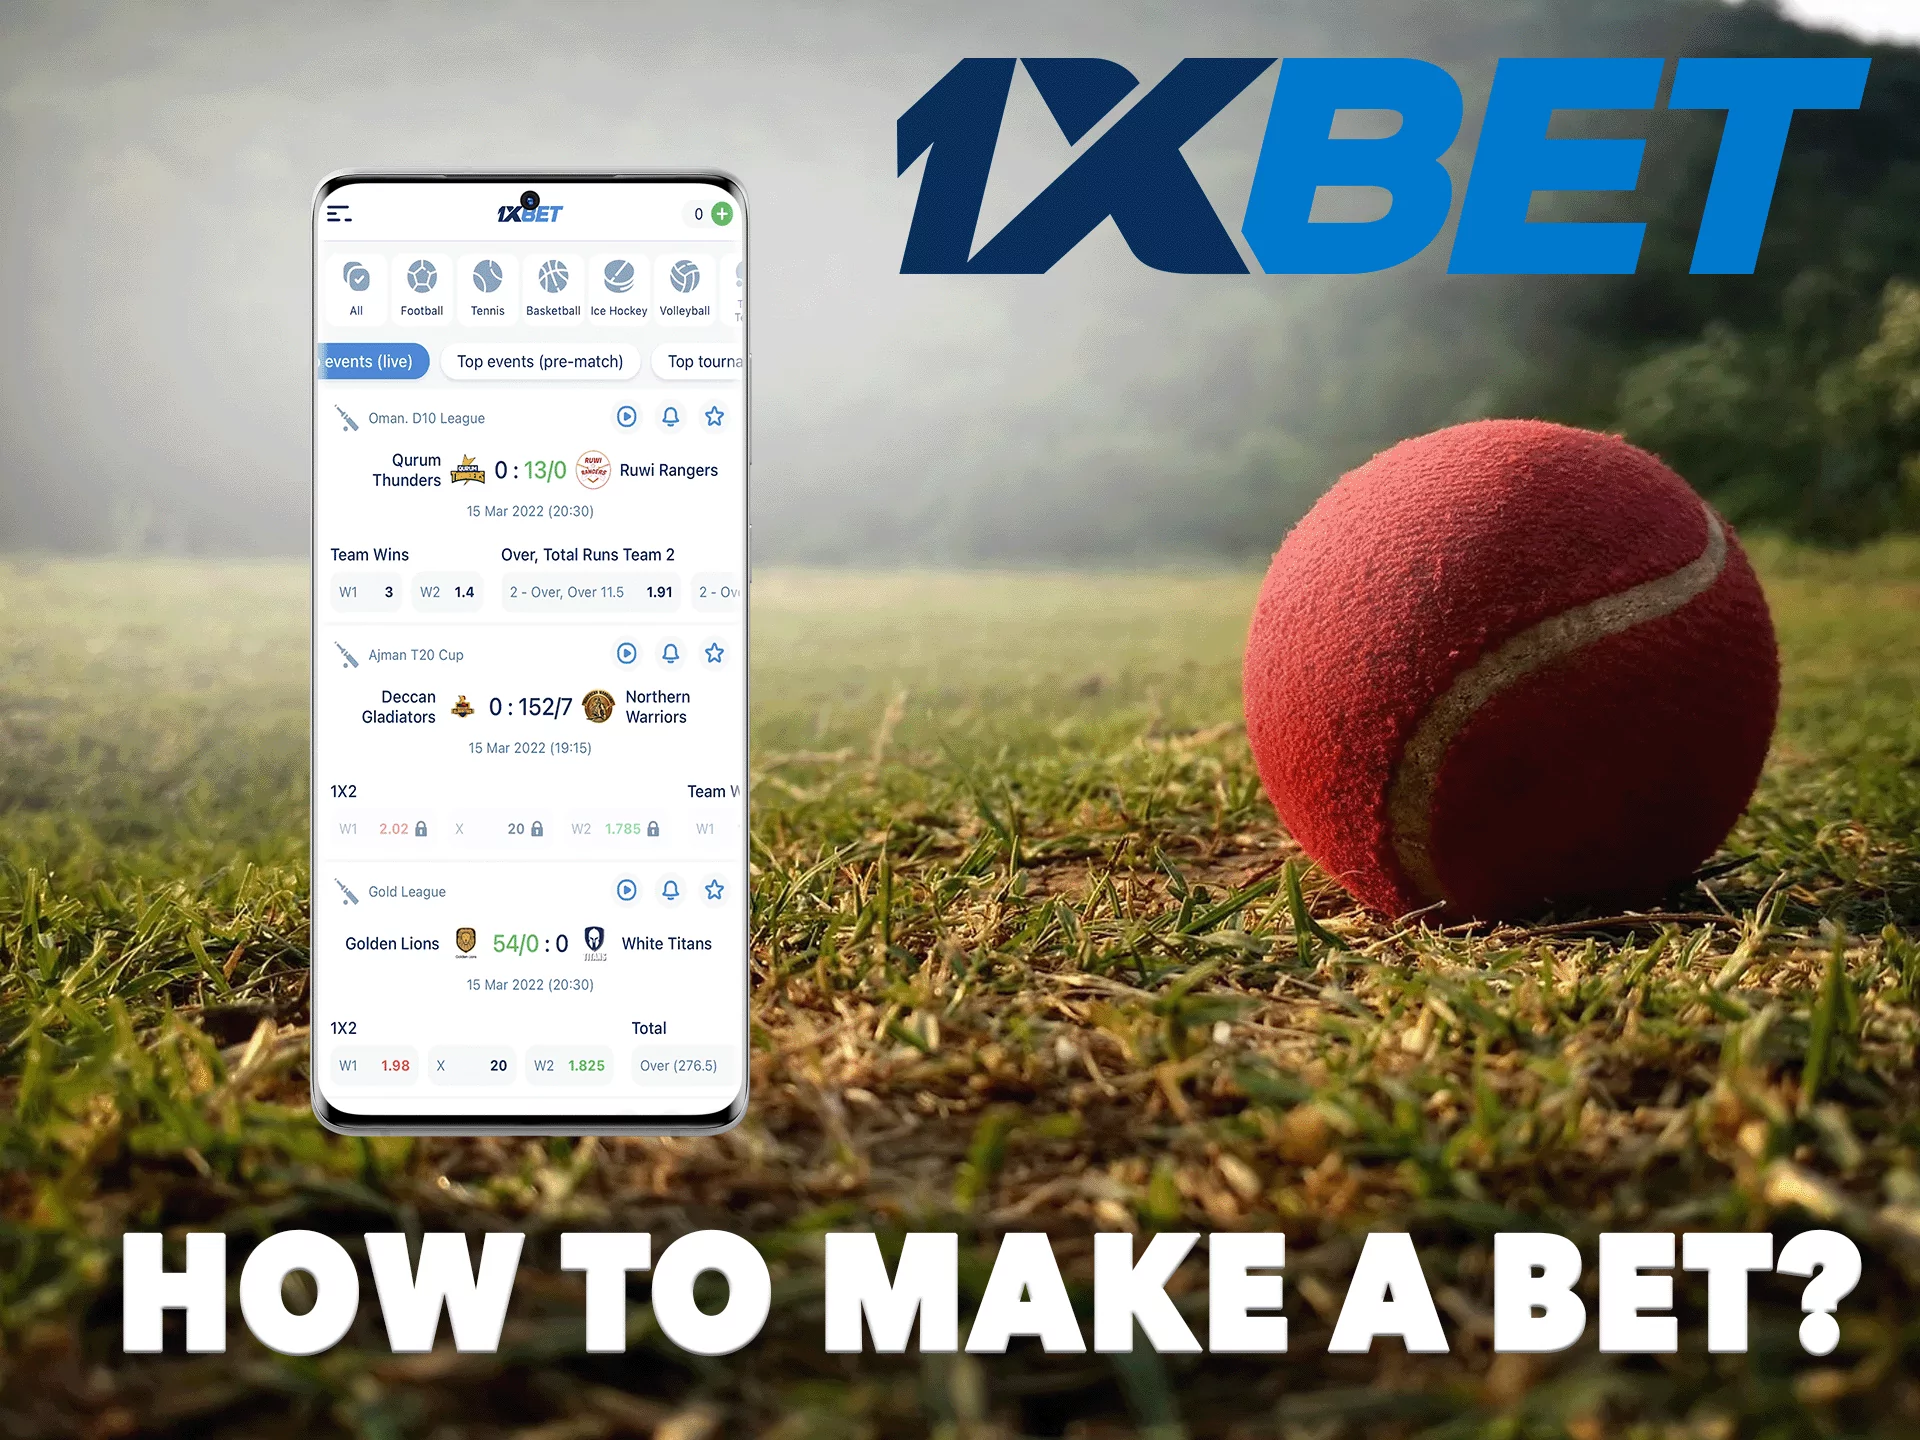 Instructions on how to make a bet in 1xbet app.